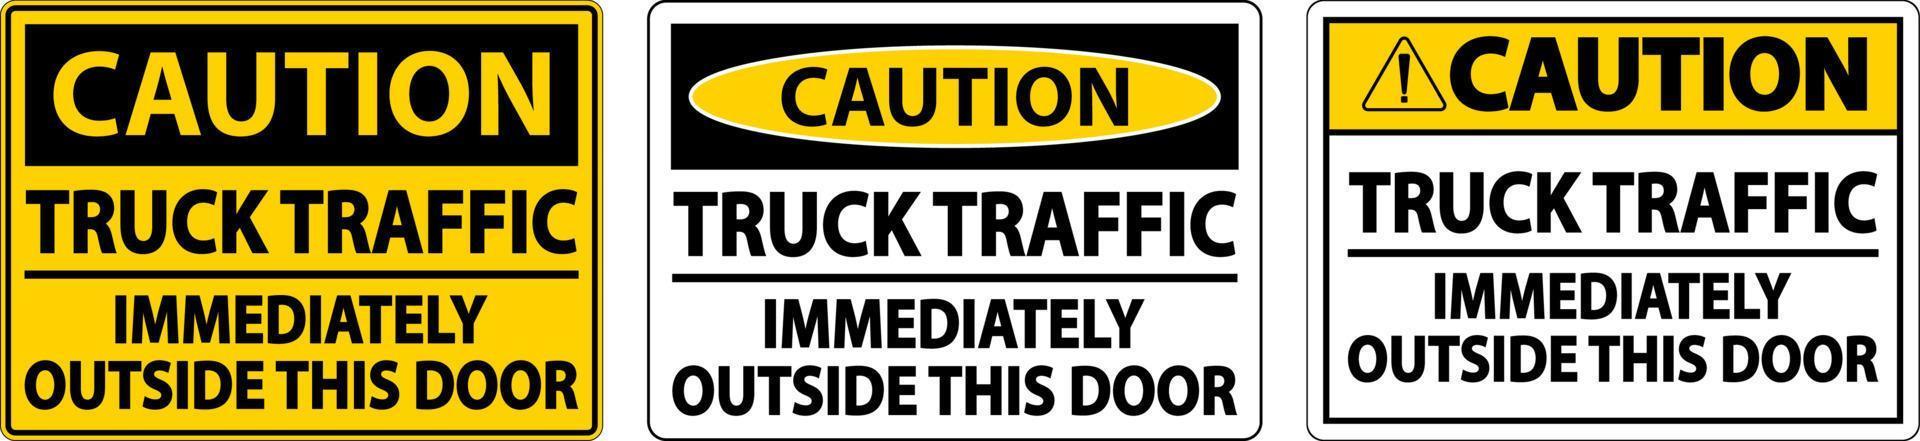 Caution Immediately Outside This Door Sign On White Background vector